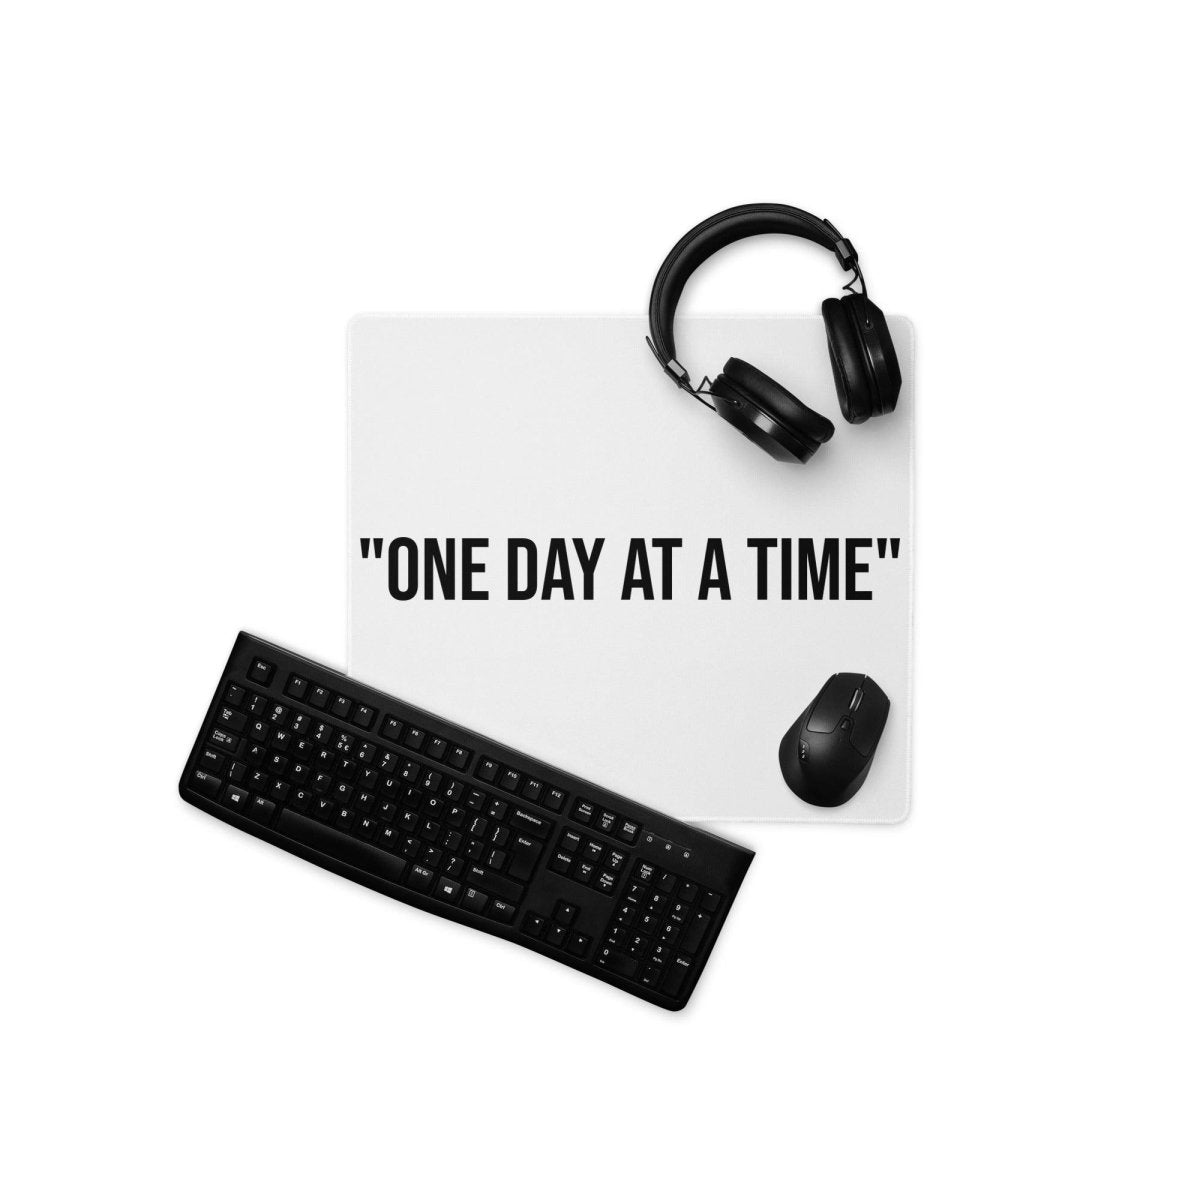 Gaming mouse pad "One day at a time" - Clean & Sober